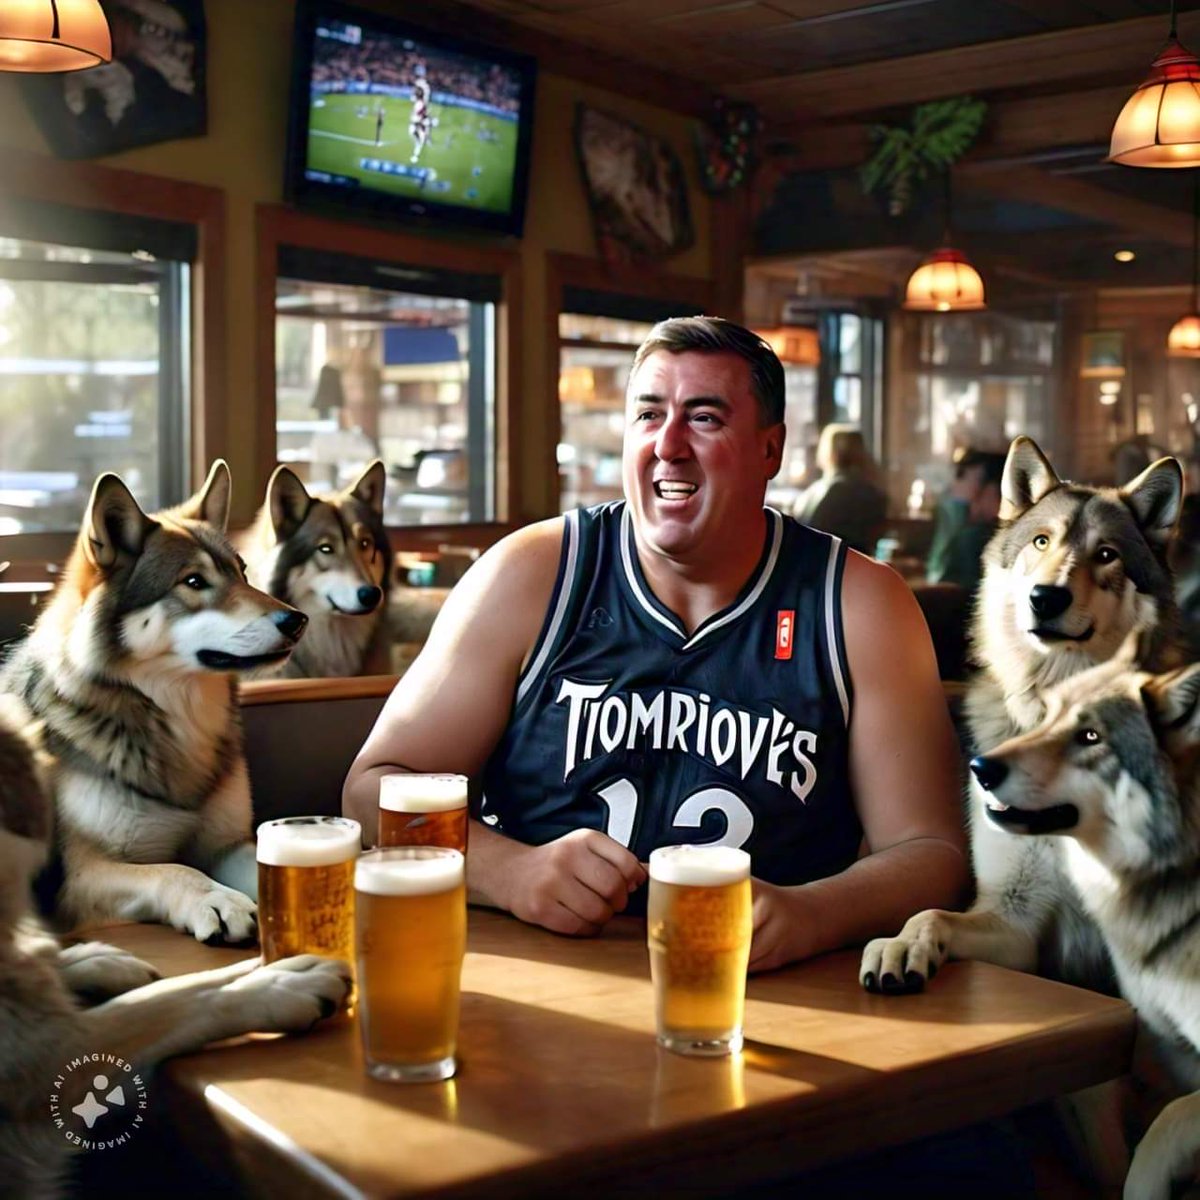 Kent Hrbek at Applebee's cheering for the Timberwolves buying a round of beers for the real wolves he brought with